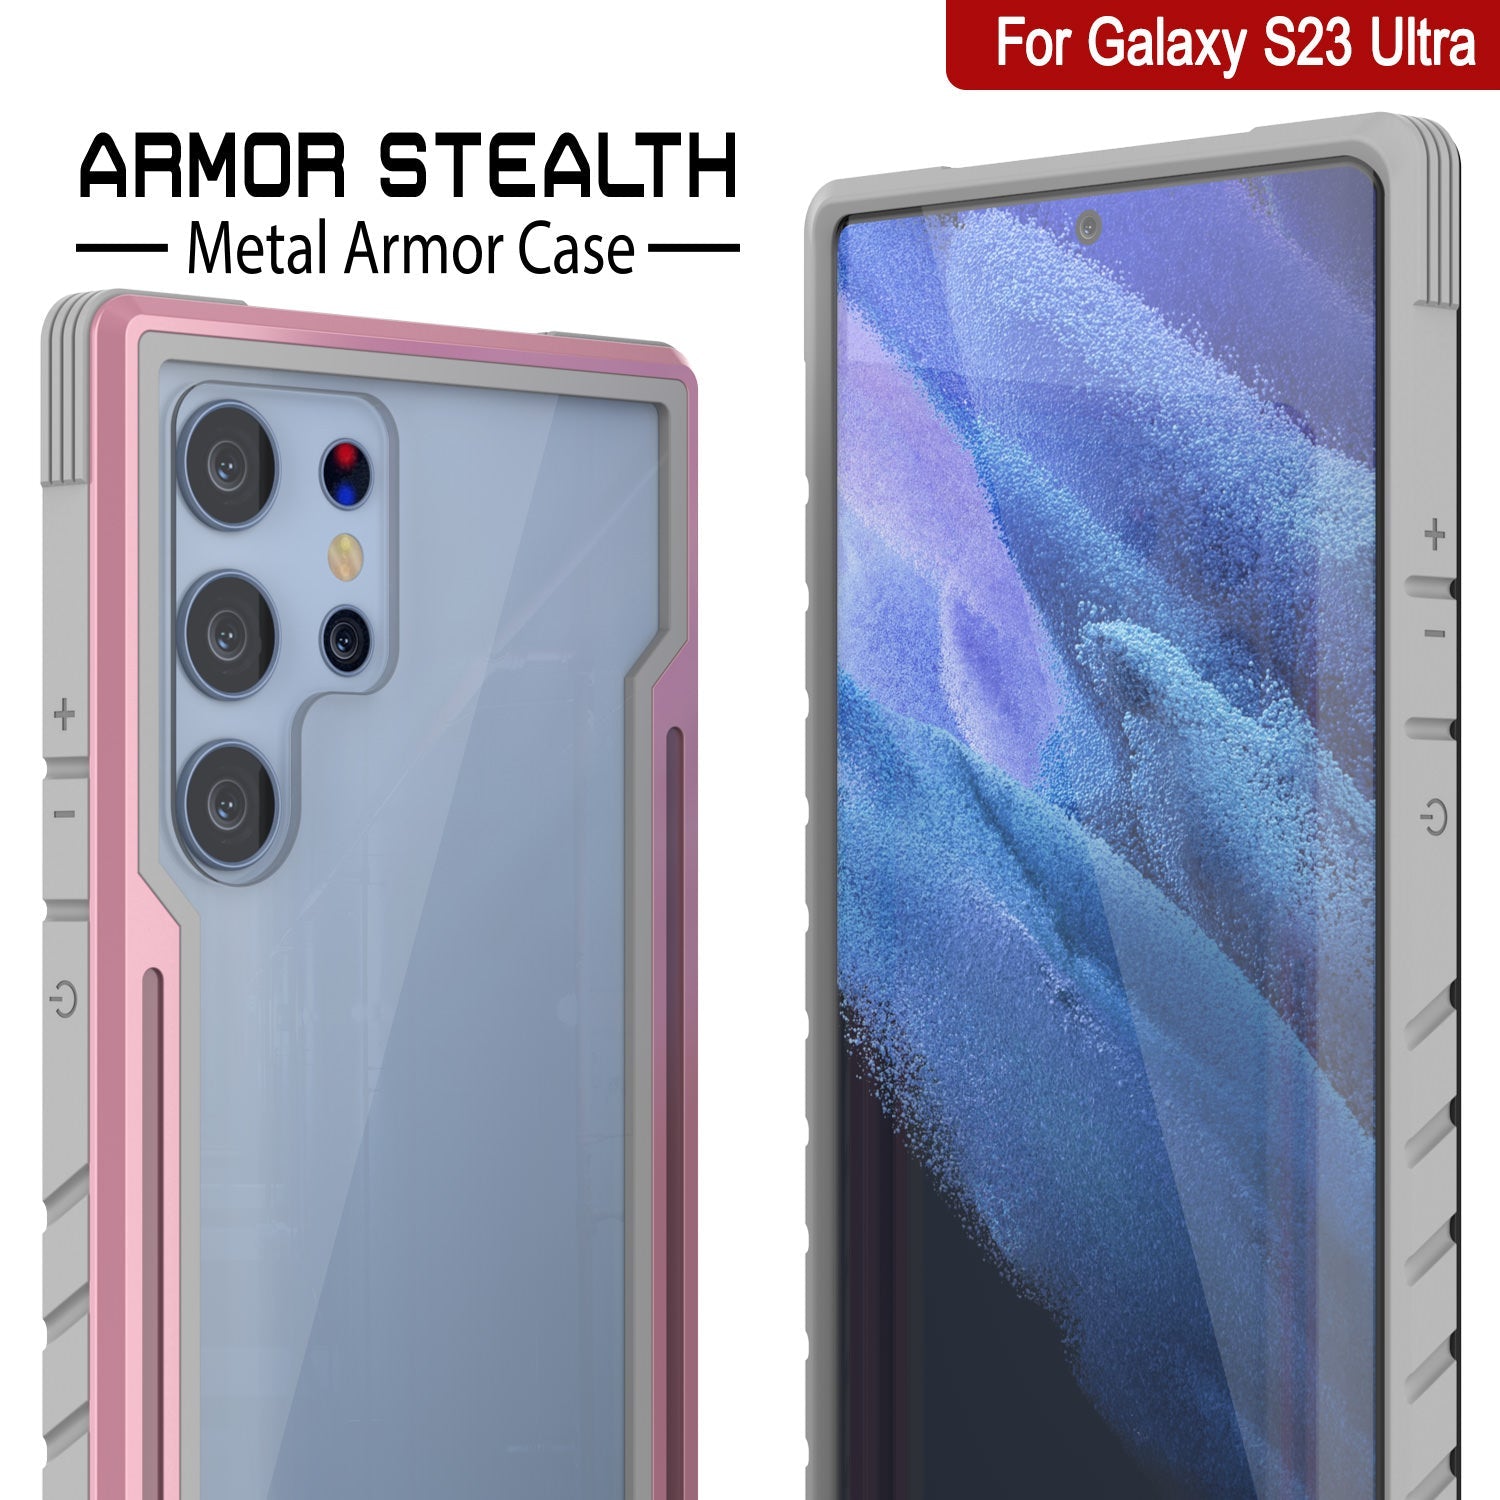 Punkcase S23 Ultra Armor Stealth Case Protective Military Grade Multilayer Cover [Rose-Gold]